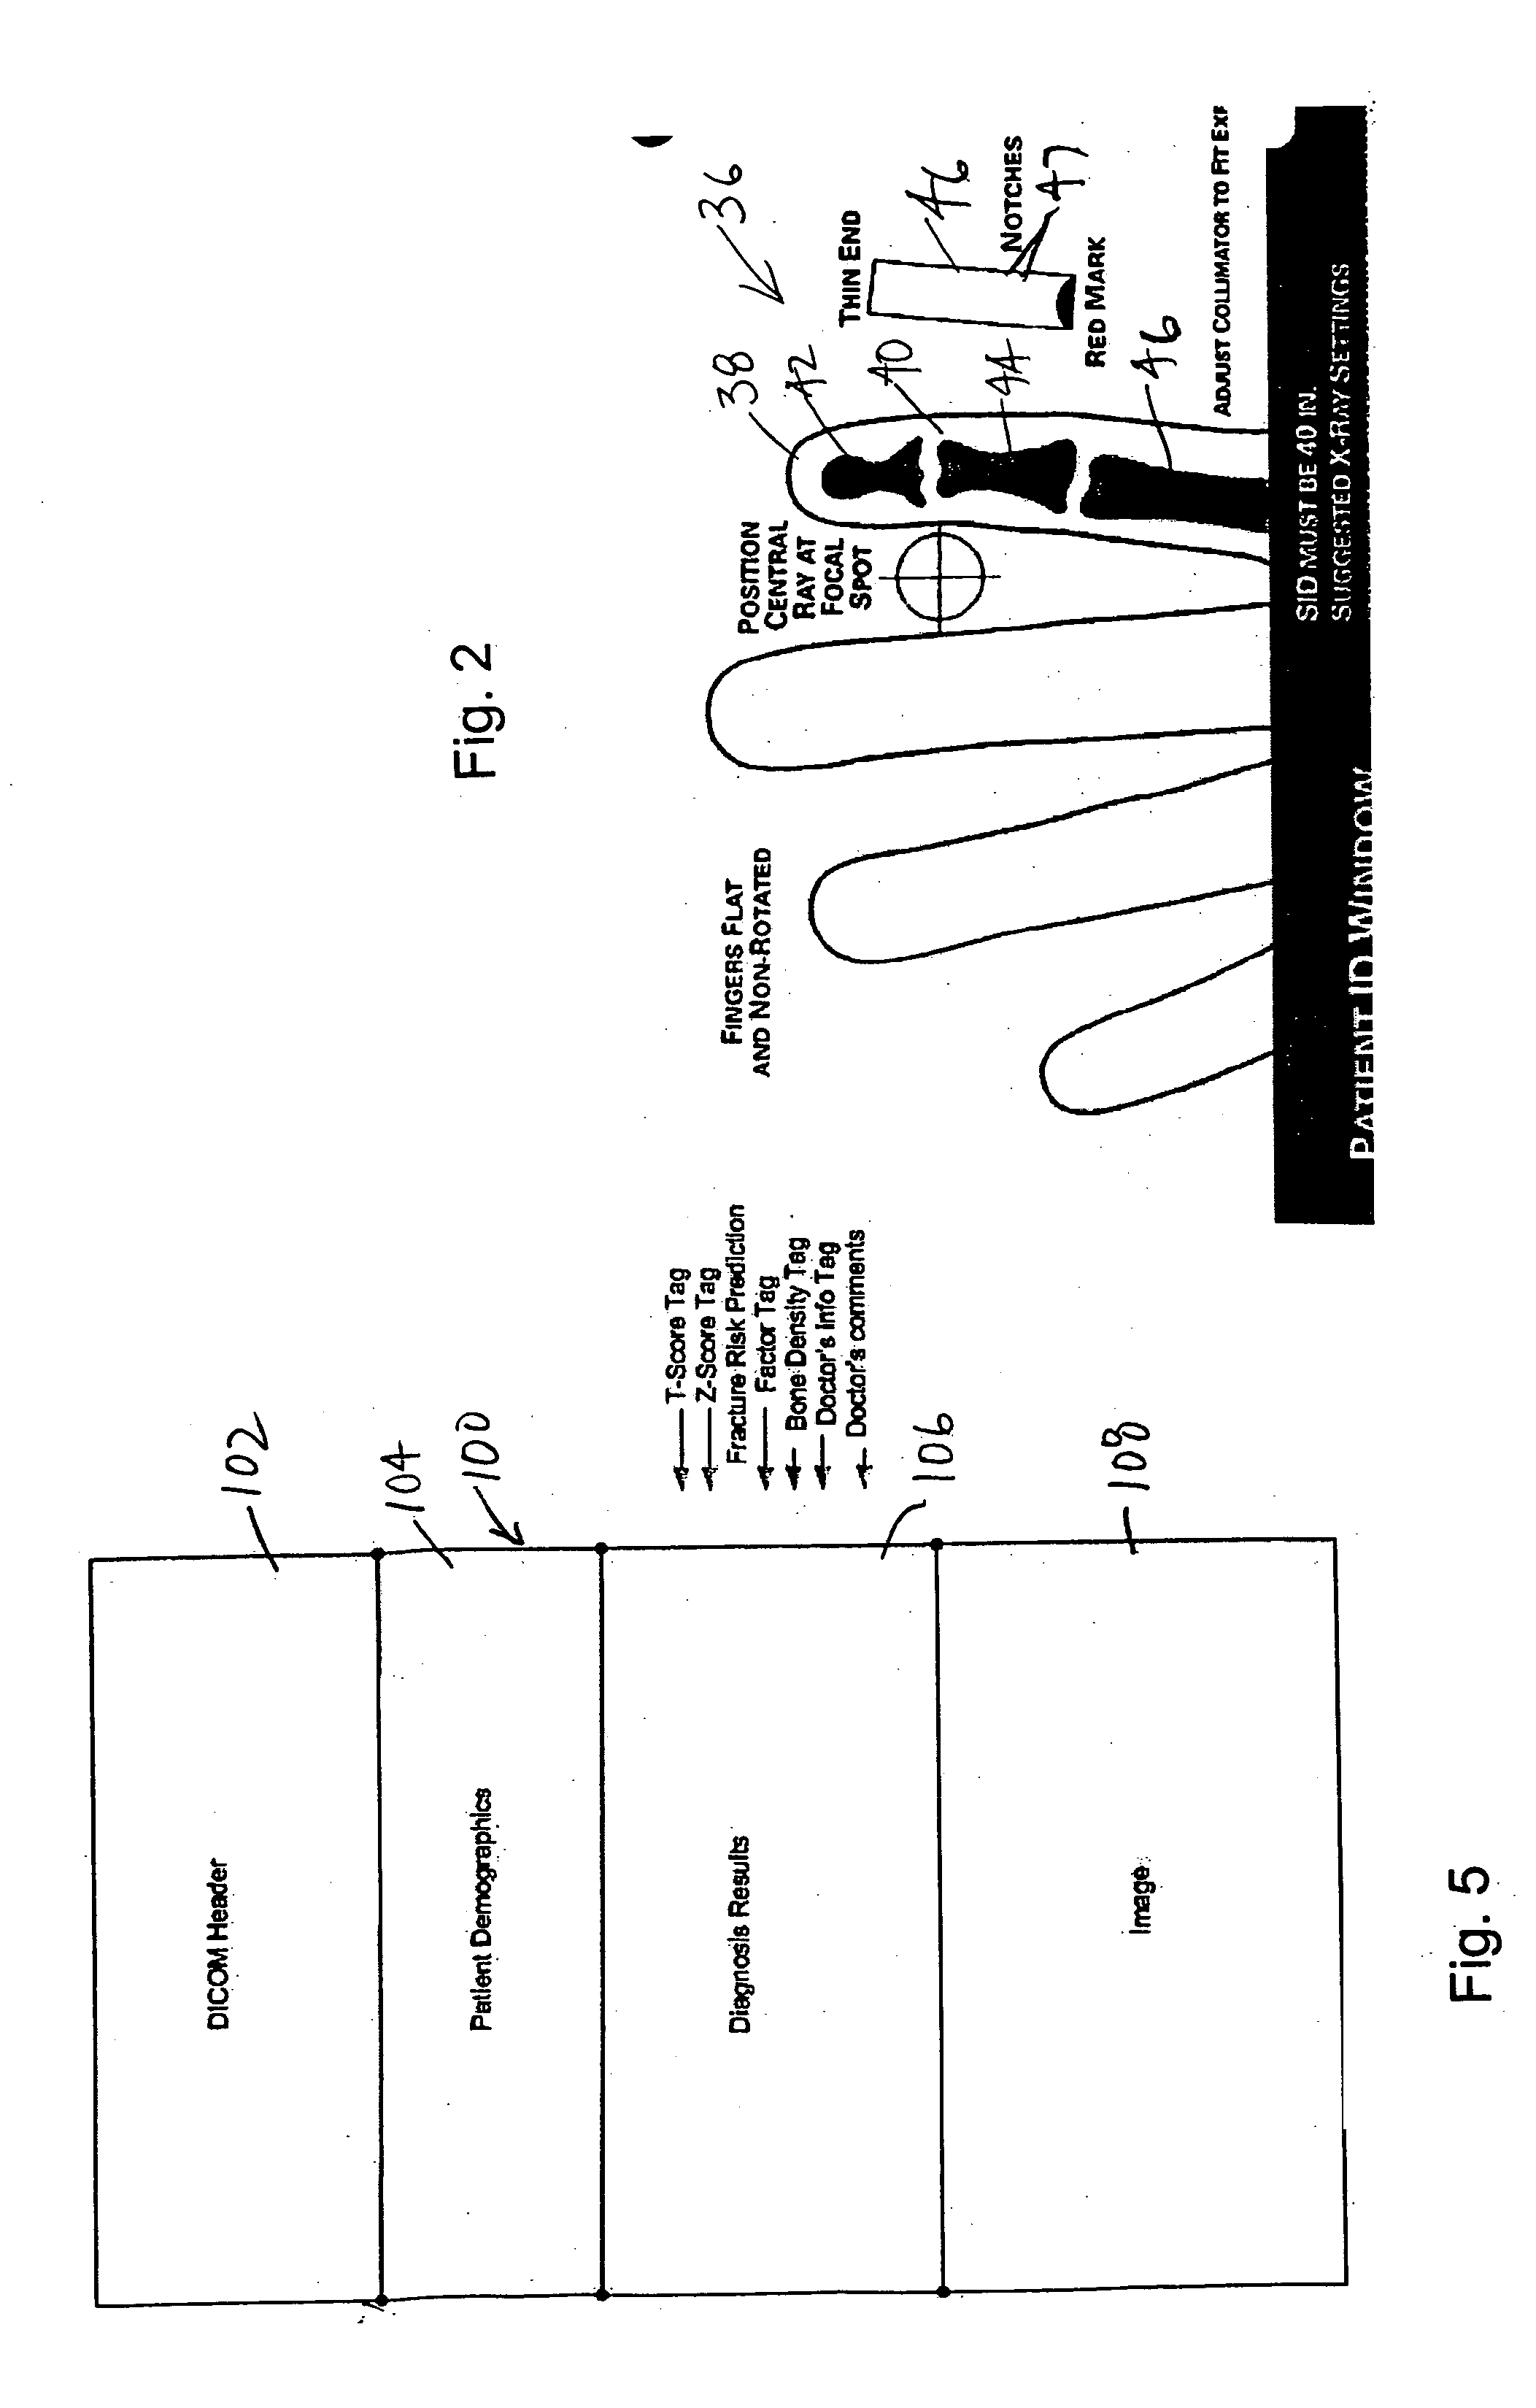 Method and system for analyzing bone conditions using DICOM compliant bone radiographic image